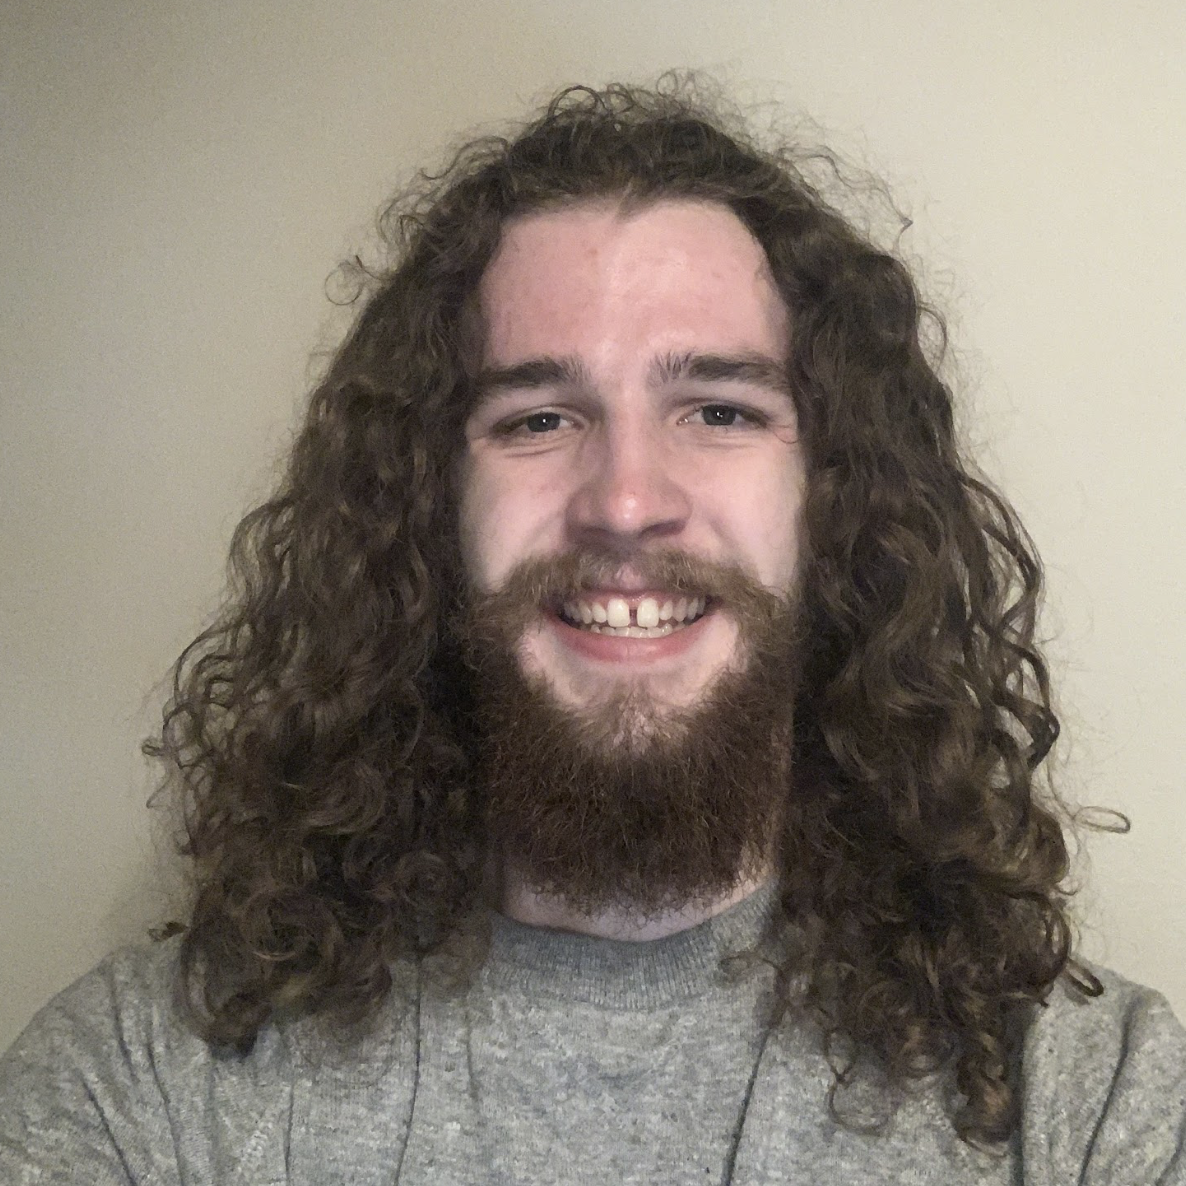 A young person with long curly hair smiles at the camera.